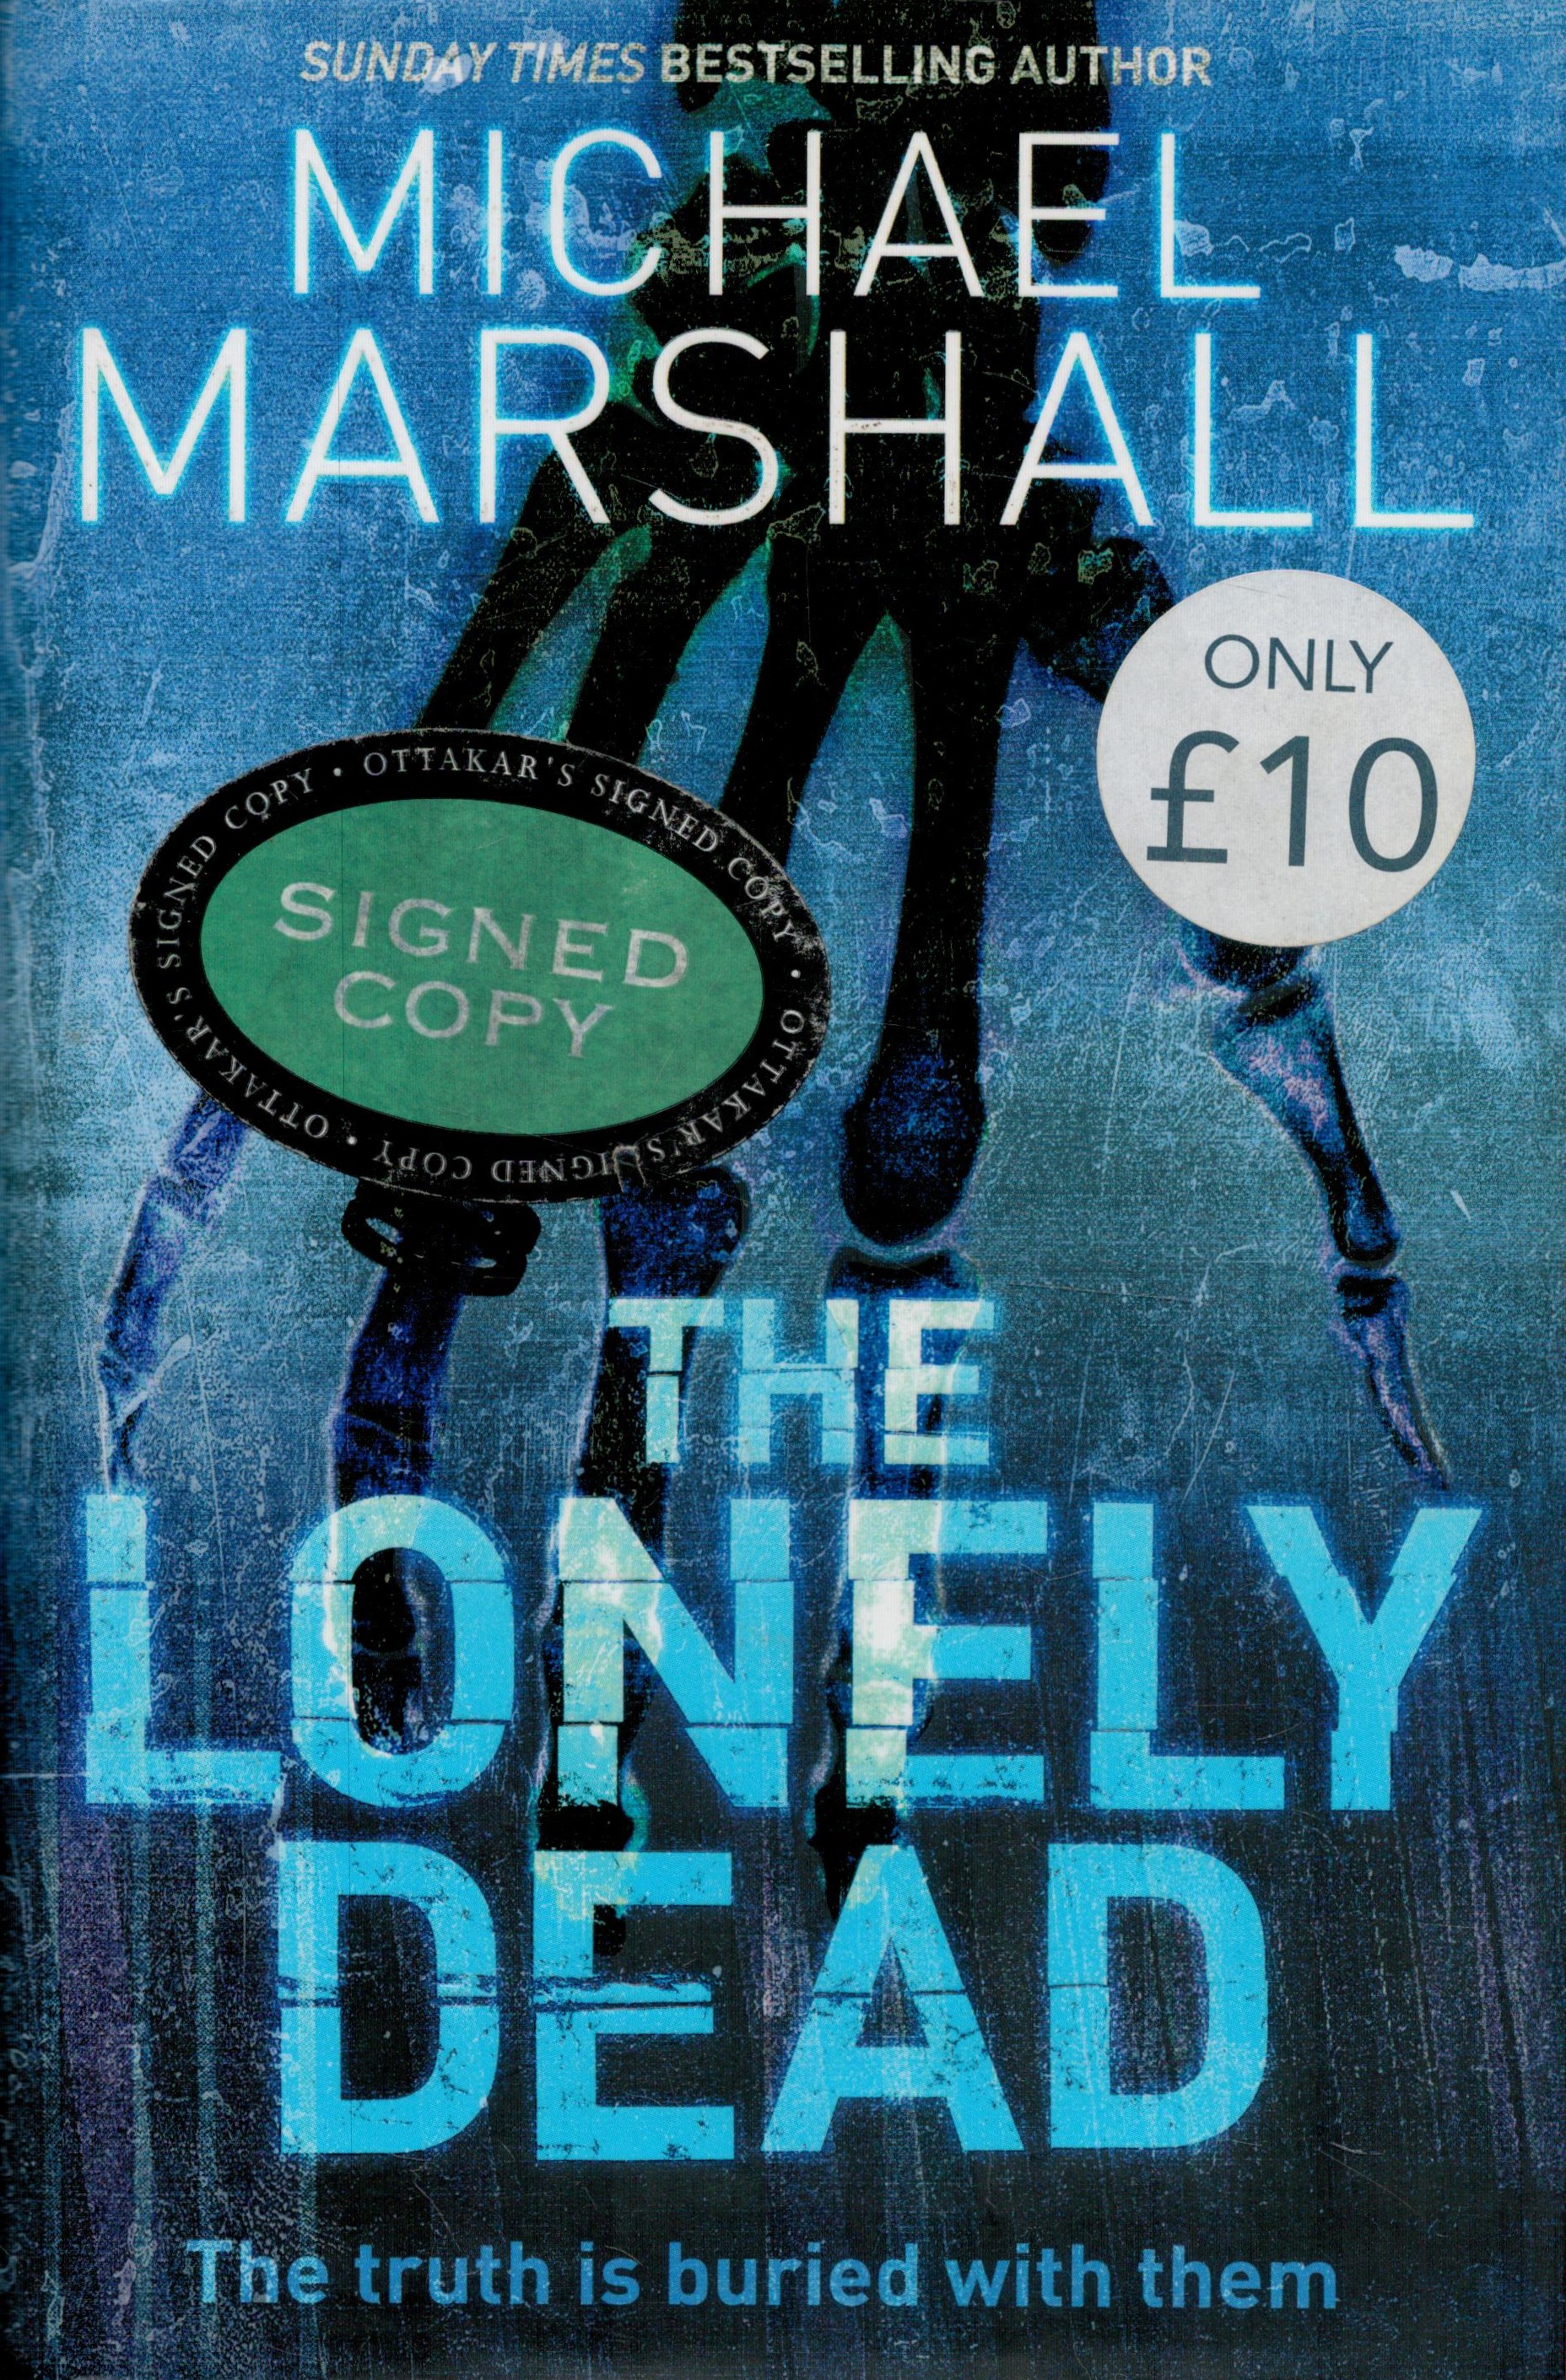 Michael Marshall Signed Book - The Lonely Dead - The truth is buried with them by Michael Marshall